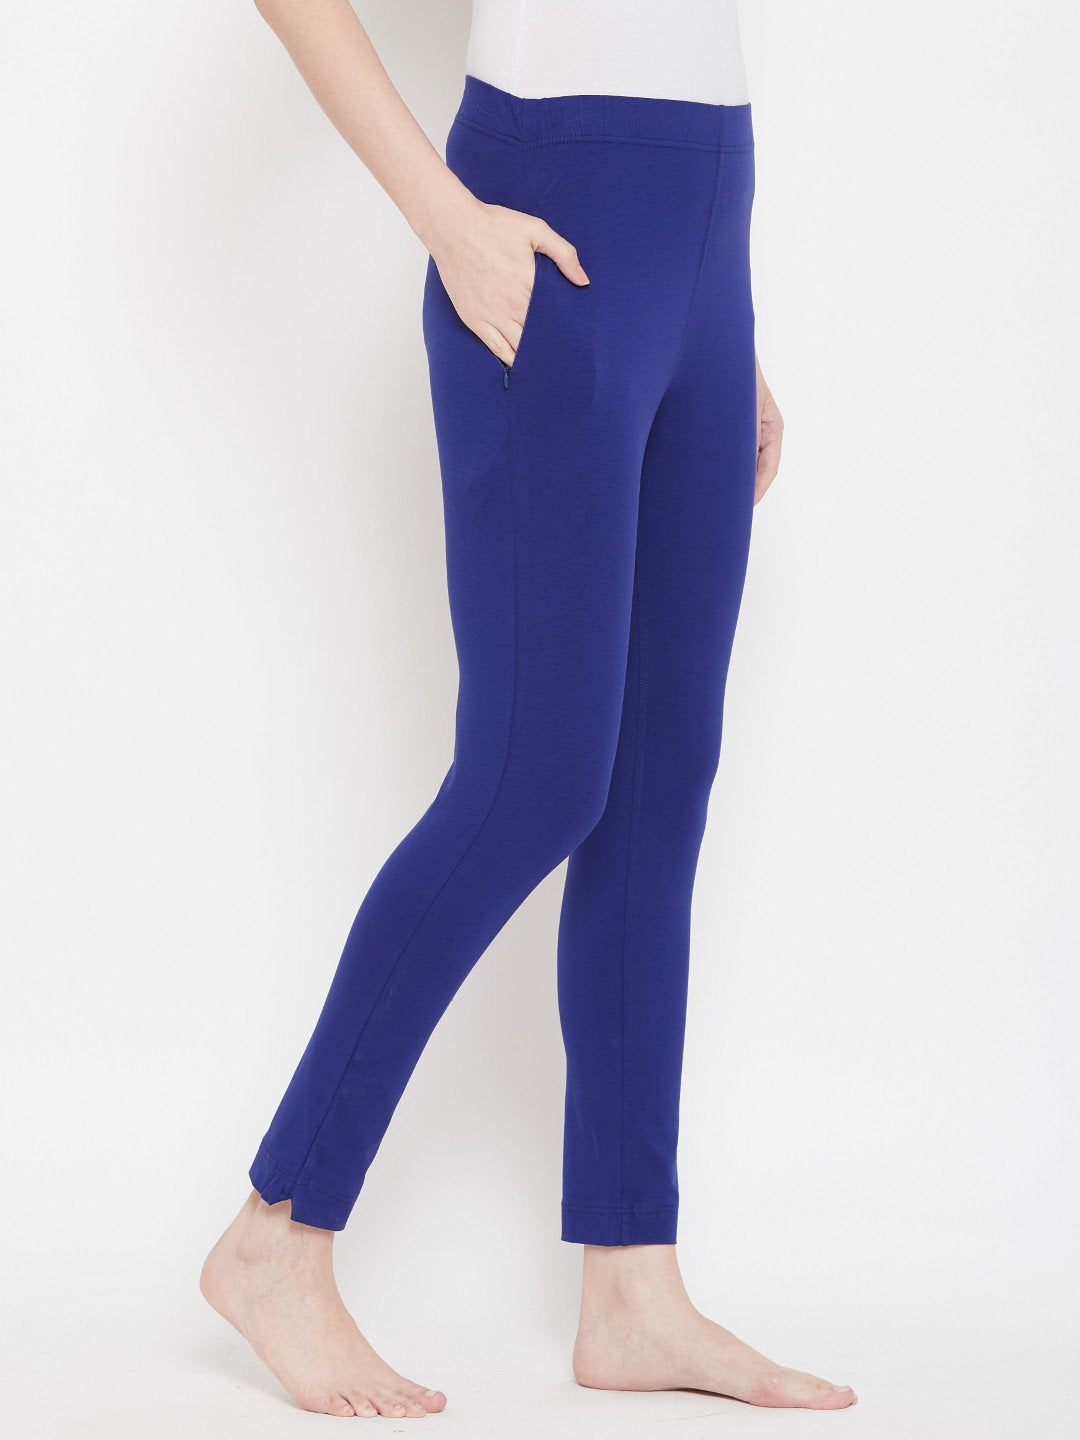 Cotton Comfort Lady Ladies Navy Blue Plain Legging, Size: Available In XL,XXL  and XXXL at Rs 230 in Thane